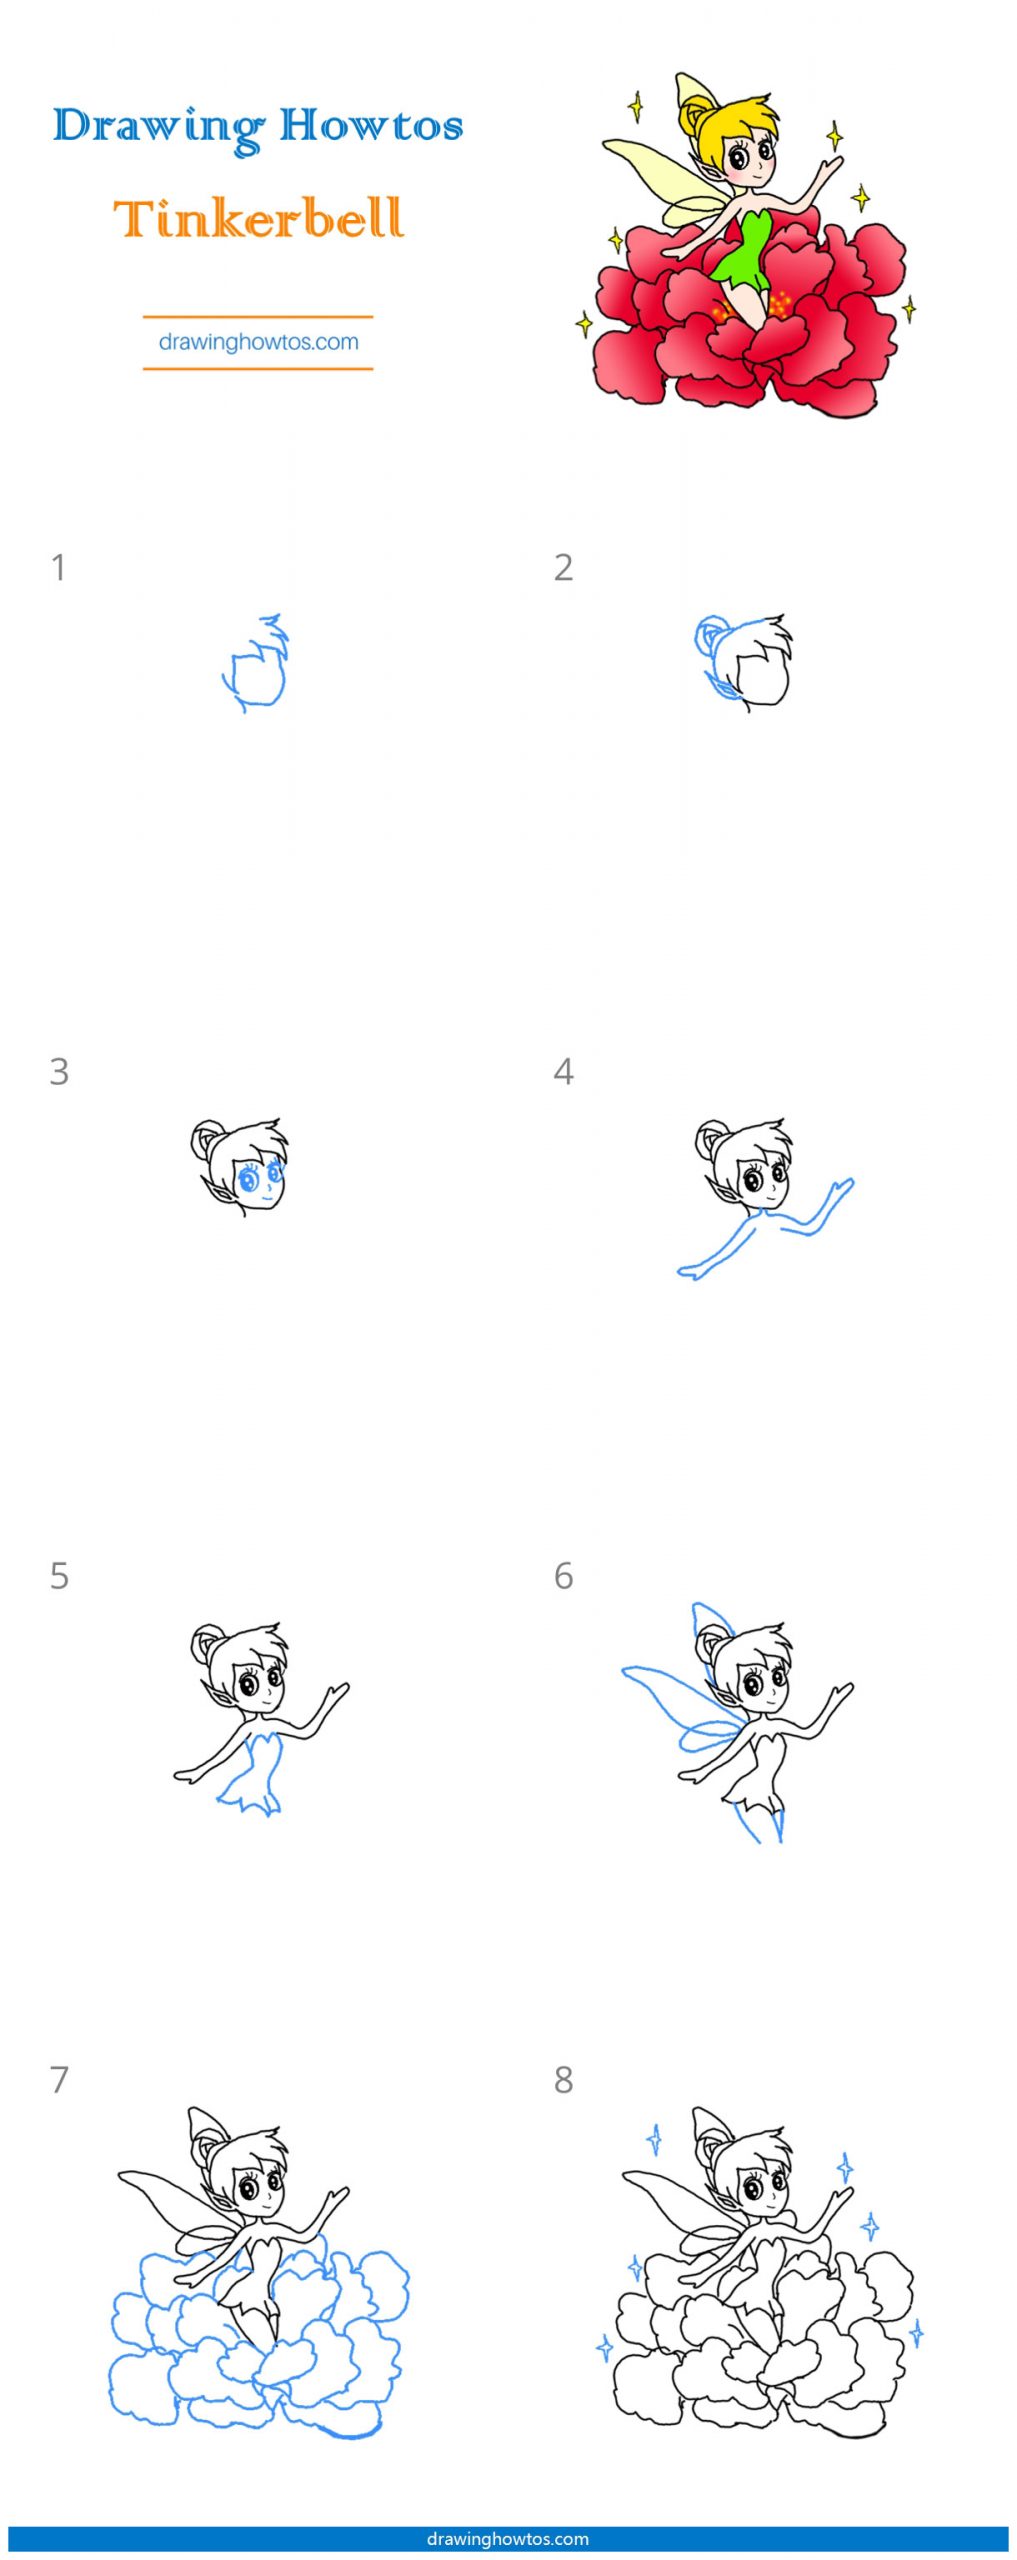 How to Draw a Tinkerbell Step by Step